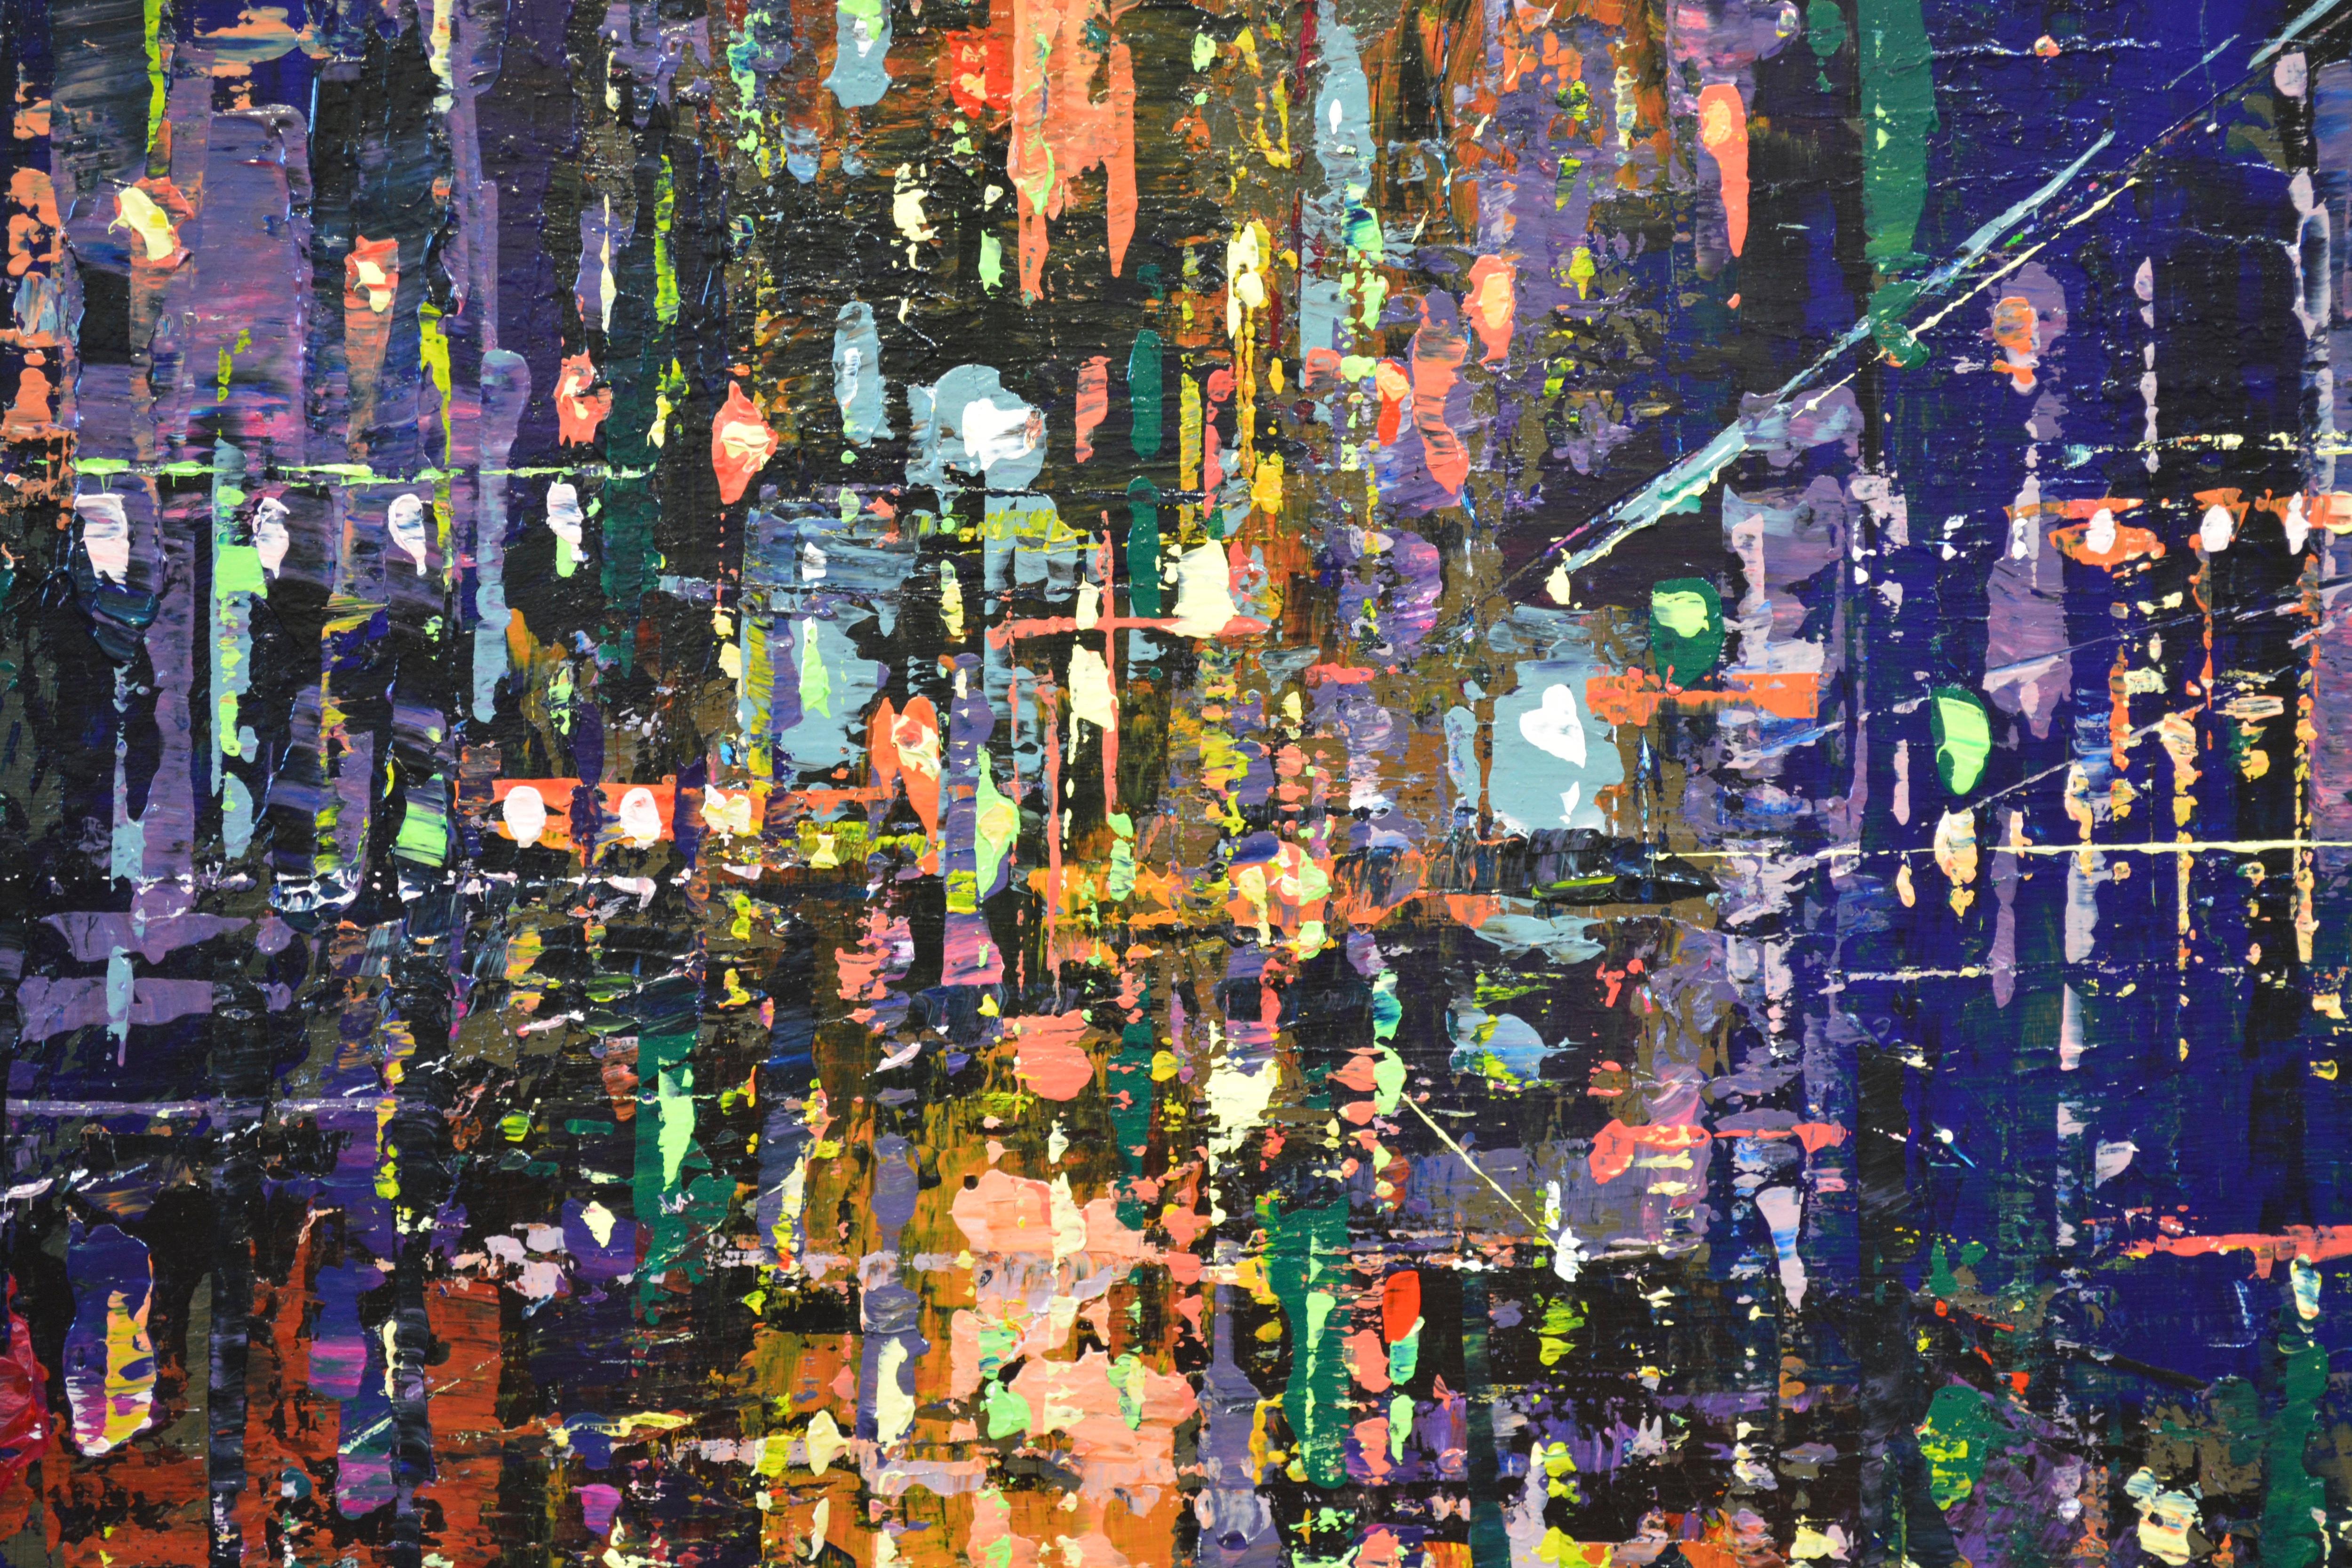 Canadian Contemporary Art by David Tycho - City in the Key of Purple 3